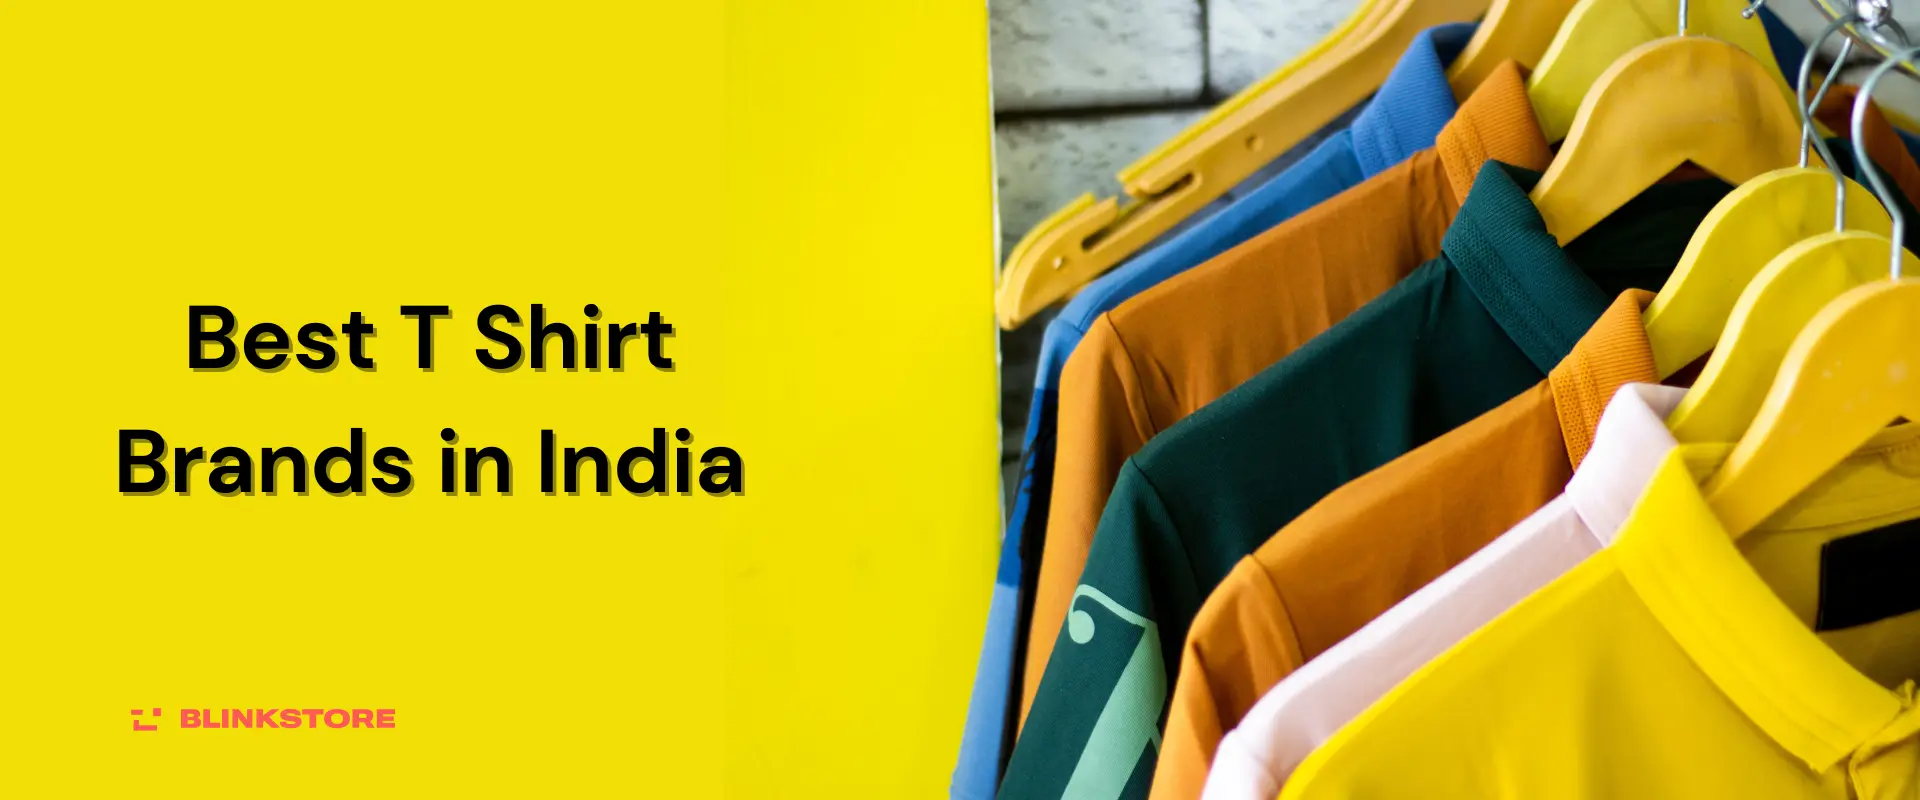 Best T Shirt Brands in India